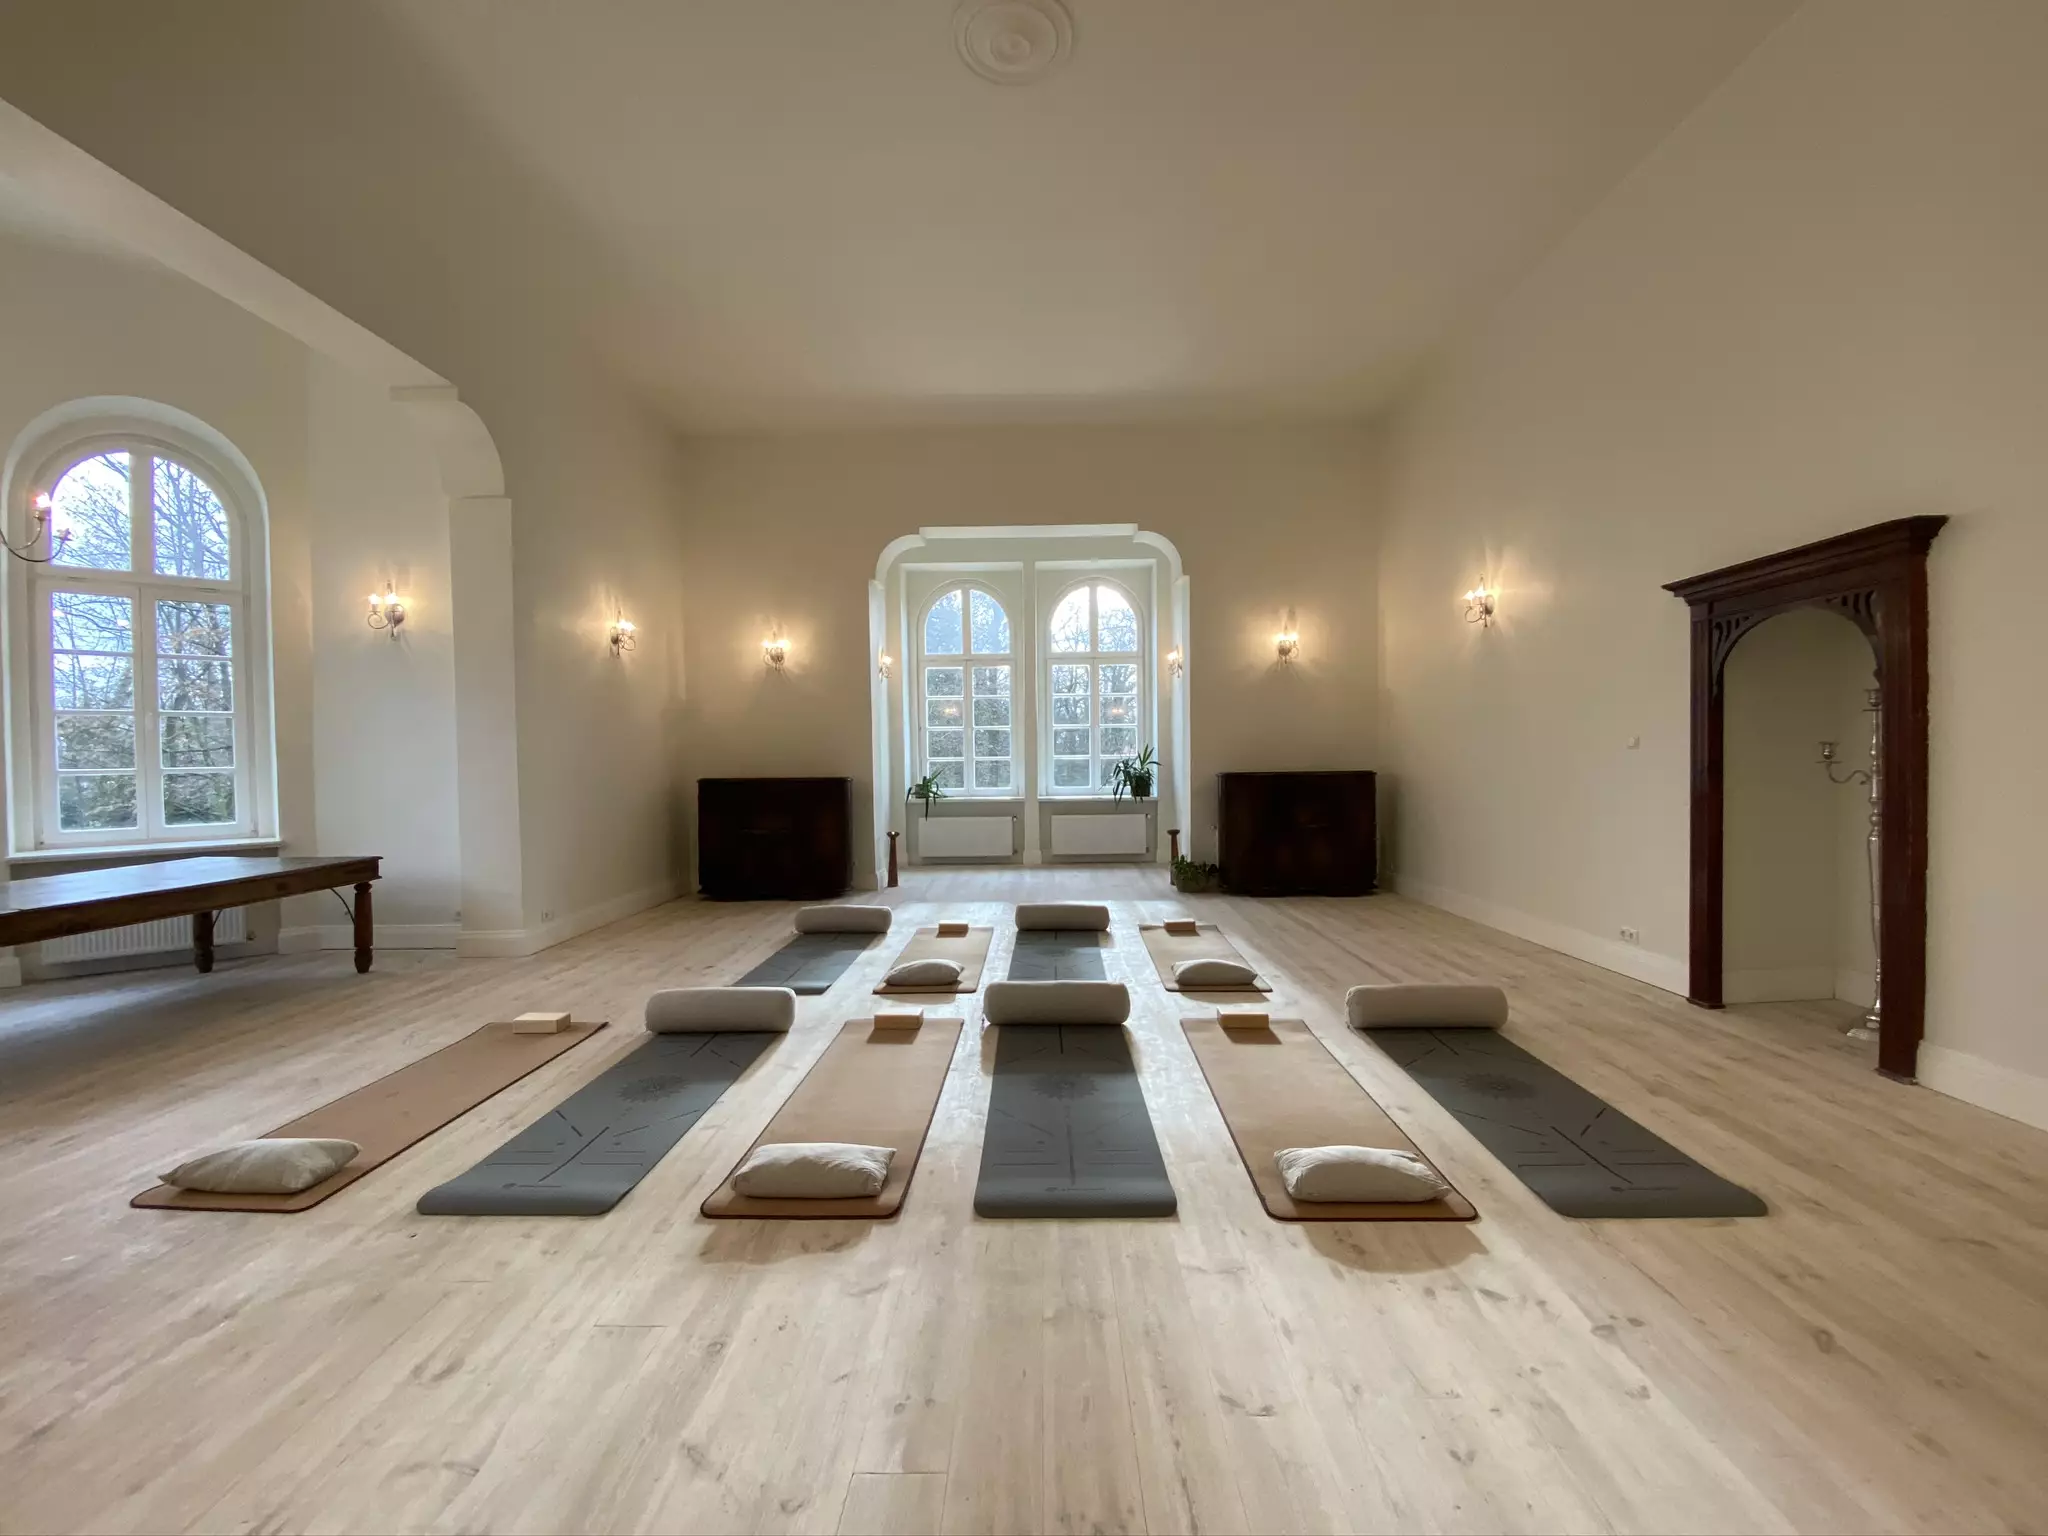 There's even a yoga studio where you can find some zen (